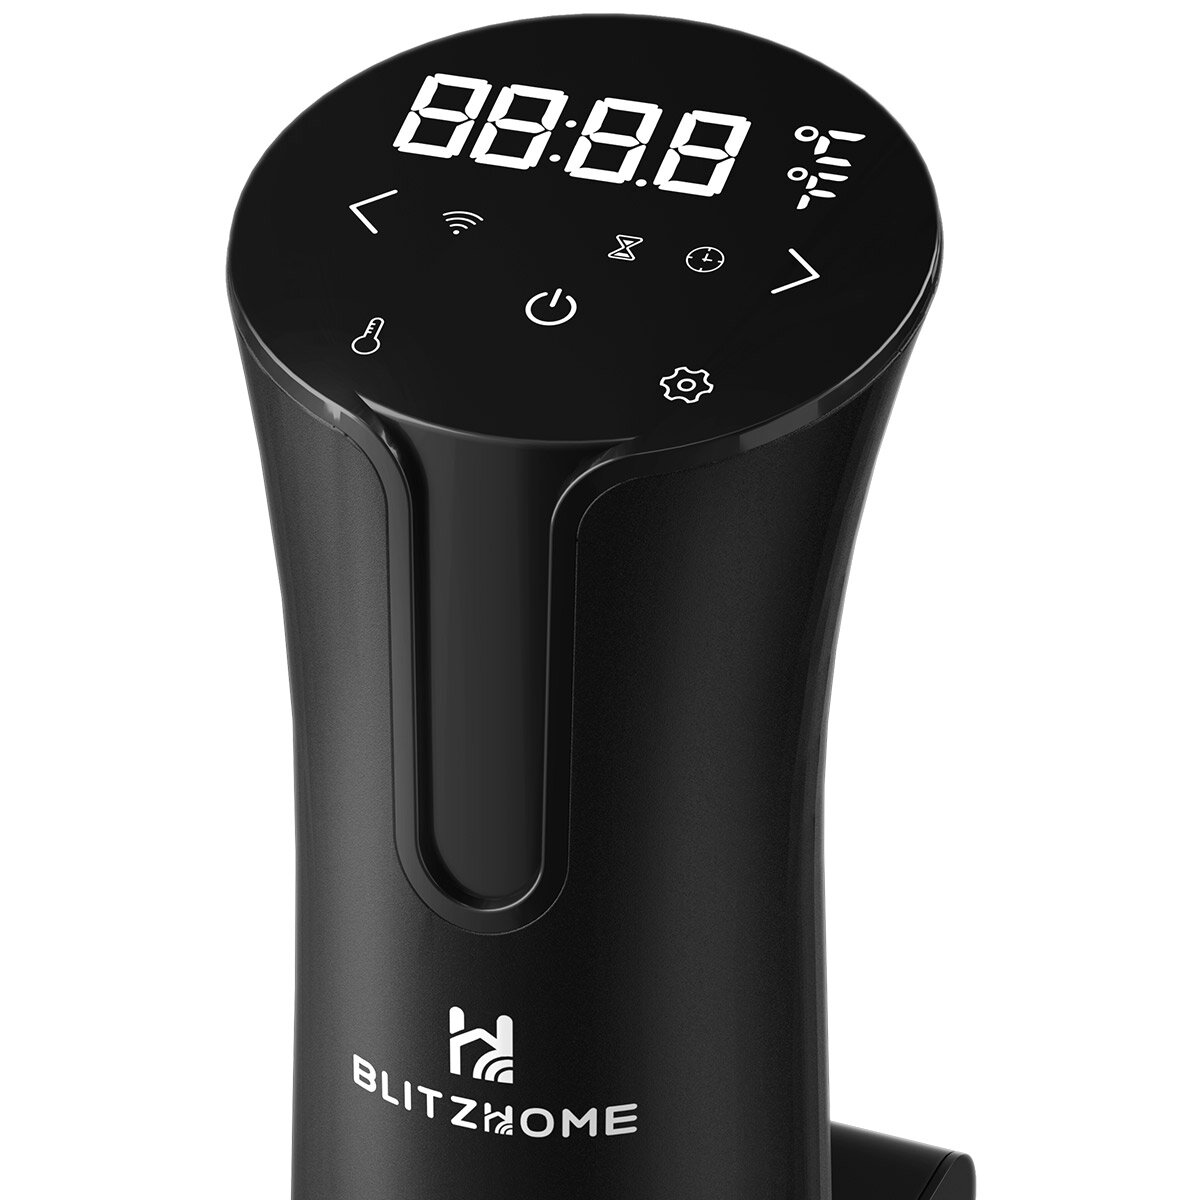 BLITZHOME SV2209 1100W Sous Vide Cooker APP Control Thermal Immersion Circulator Machine with Digital LED Display Time and Temperature Control